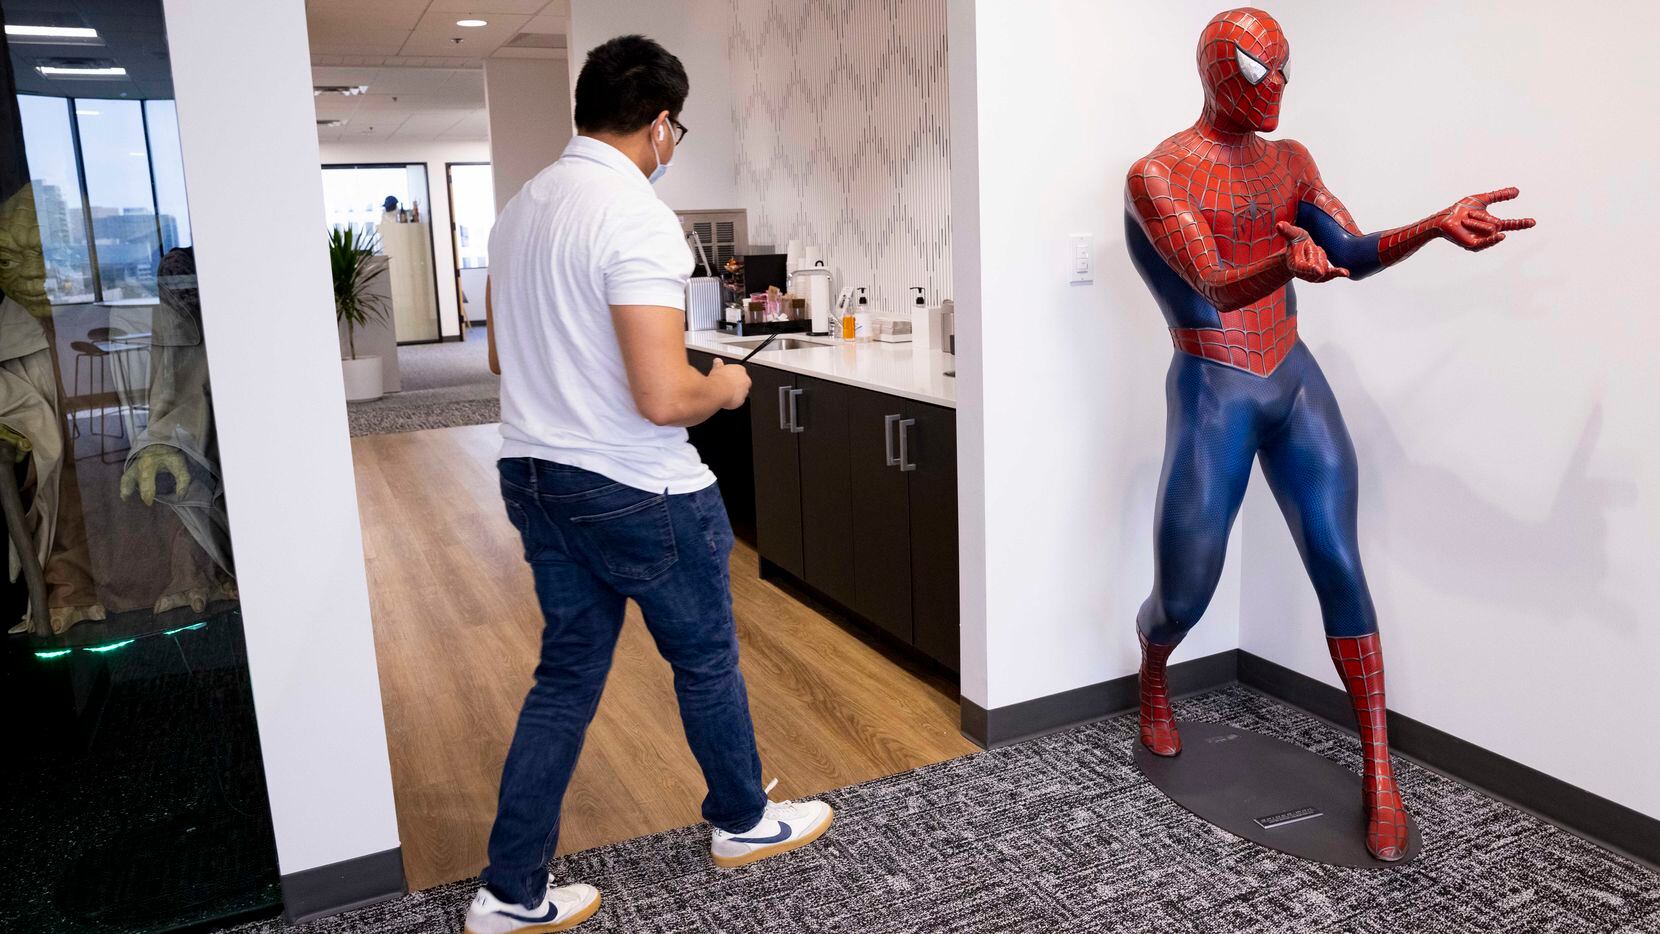 Arya Raval walks by a Spiderman statue on Sept. 2 at the Camelot office in Dallas.